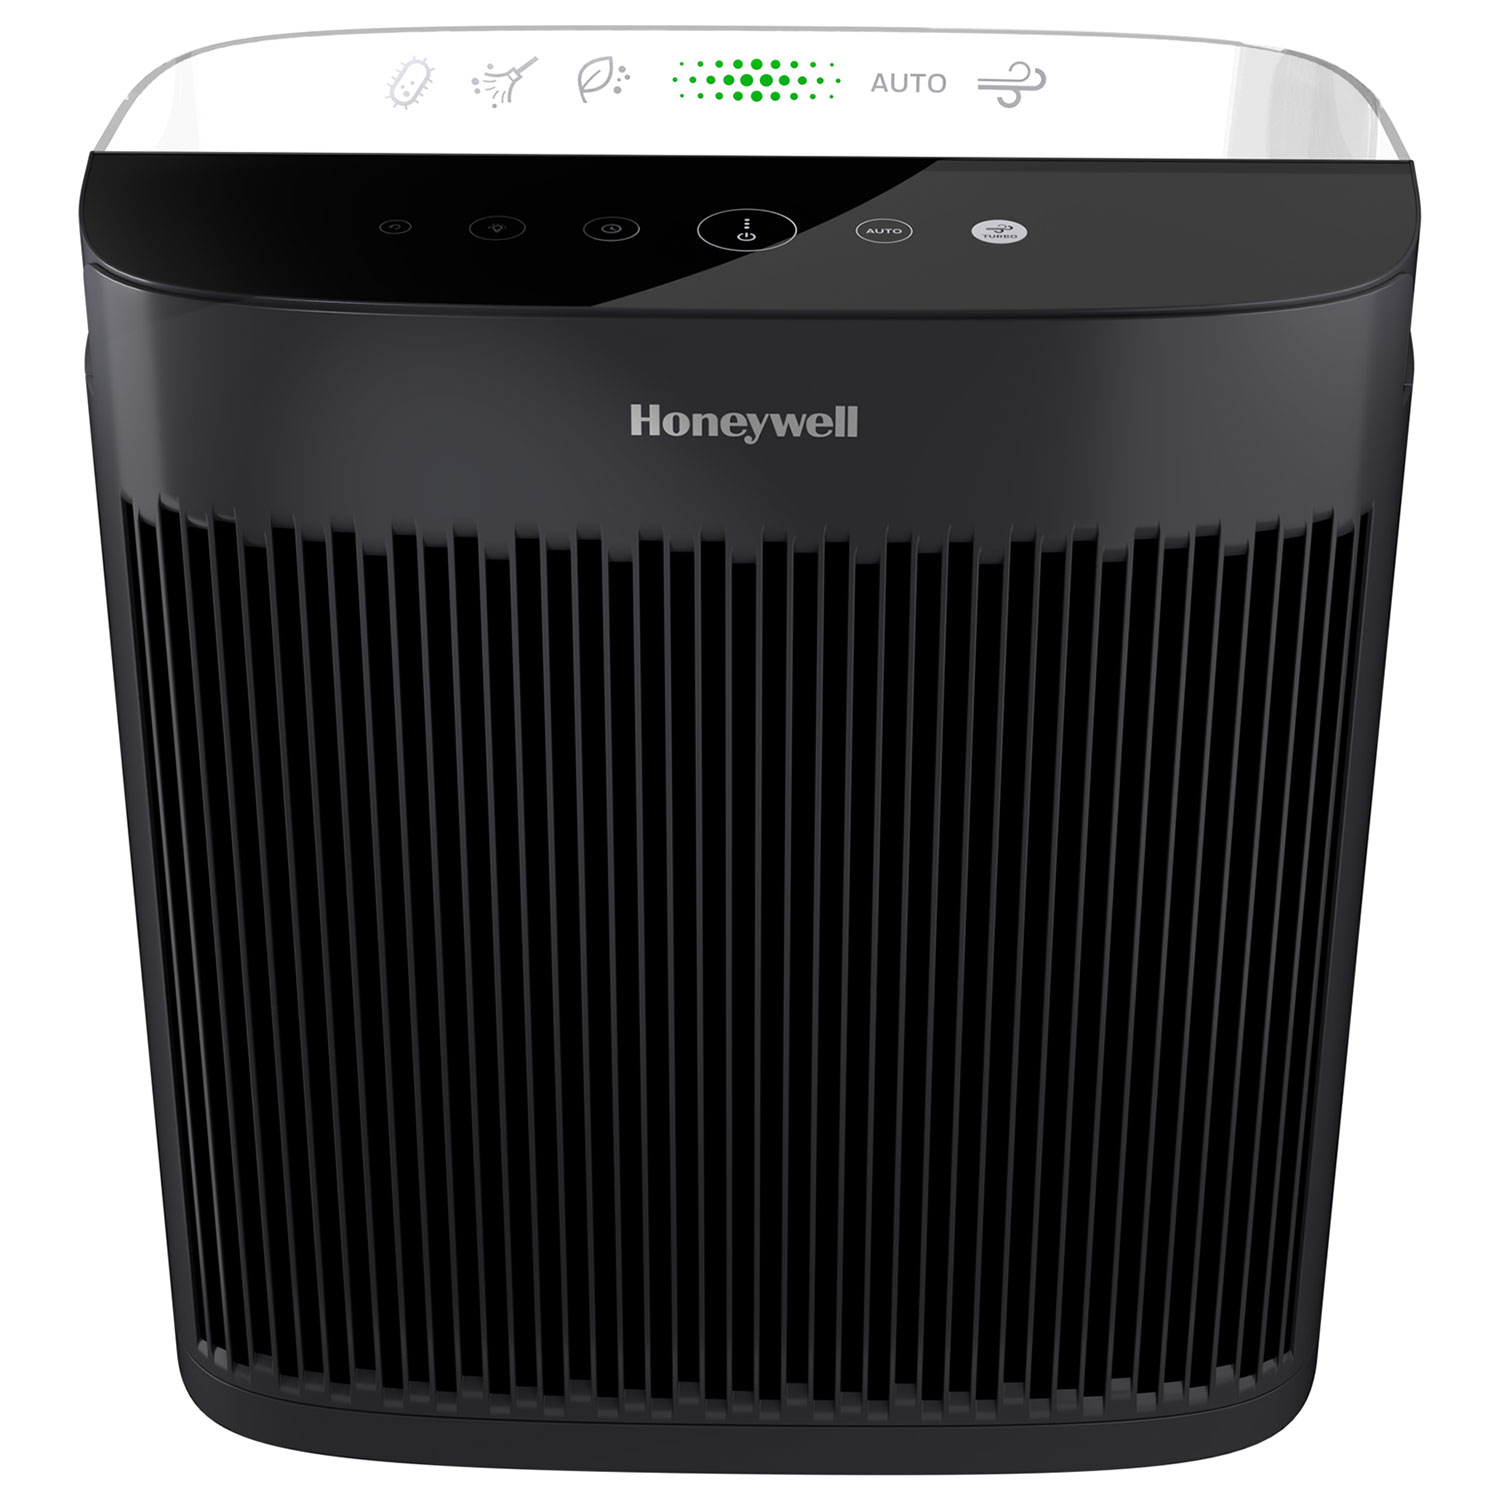 Honeywell InSight Series HEPA Home Air Purifier For Large Rooms - Black, HPA5200B